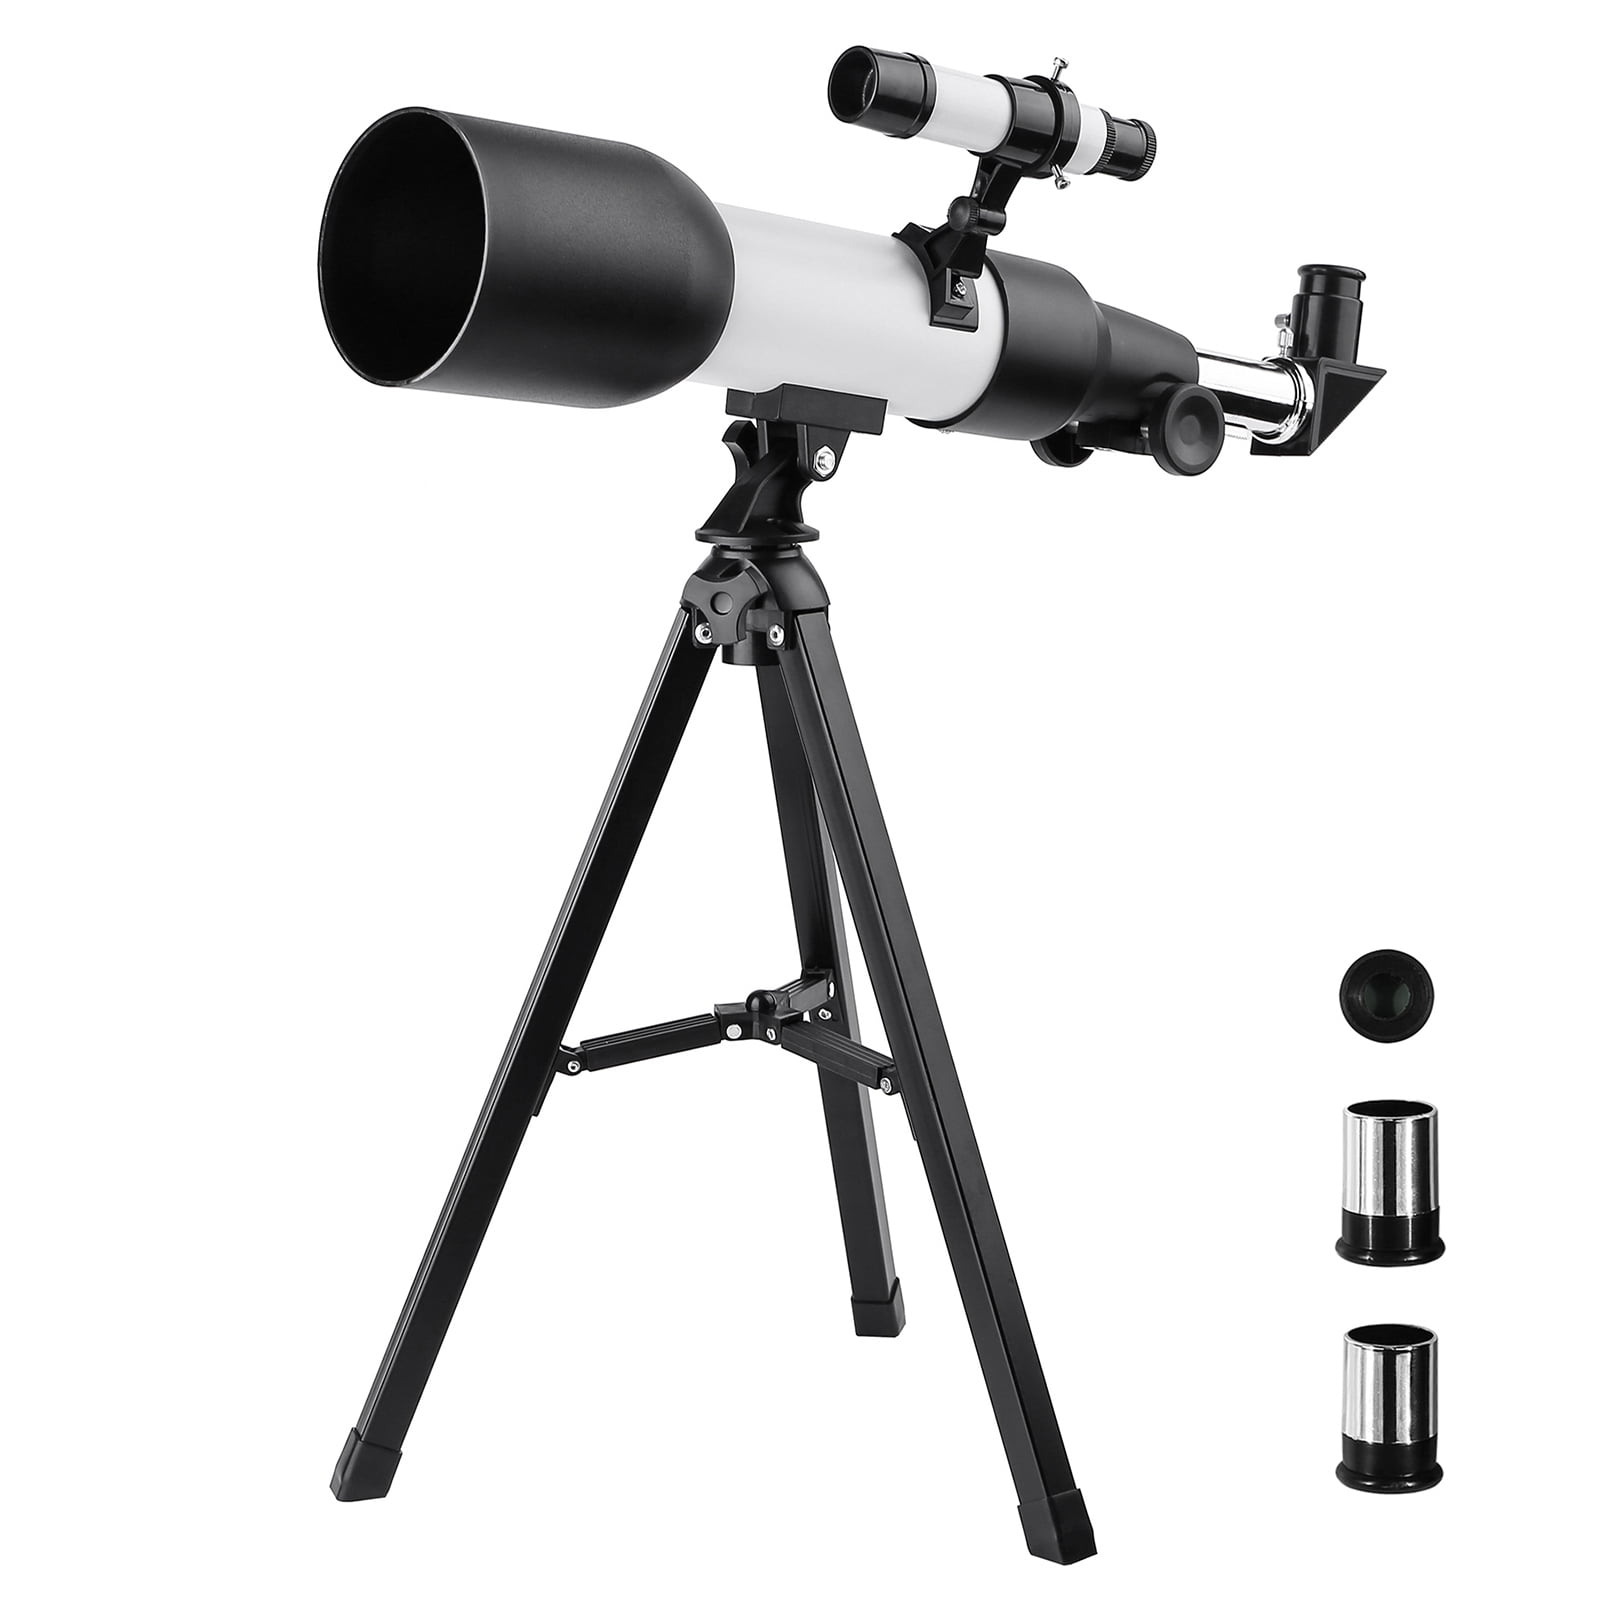 Phone Adapter Astronomical Telescope for Kids and Astronomy Beginners with Tripod Wire Shutter 900mm/60mm Starter Scope Good Partner to View Landscape and Planet 